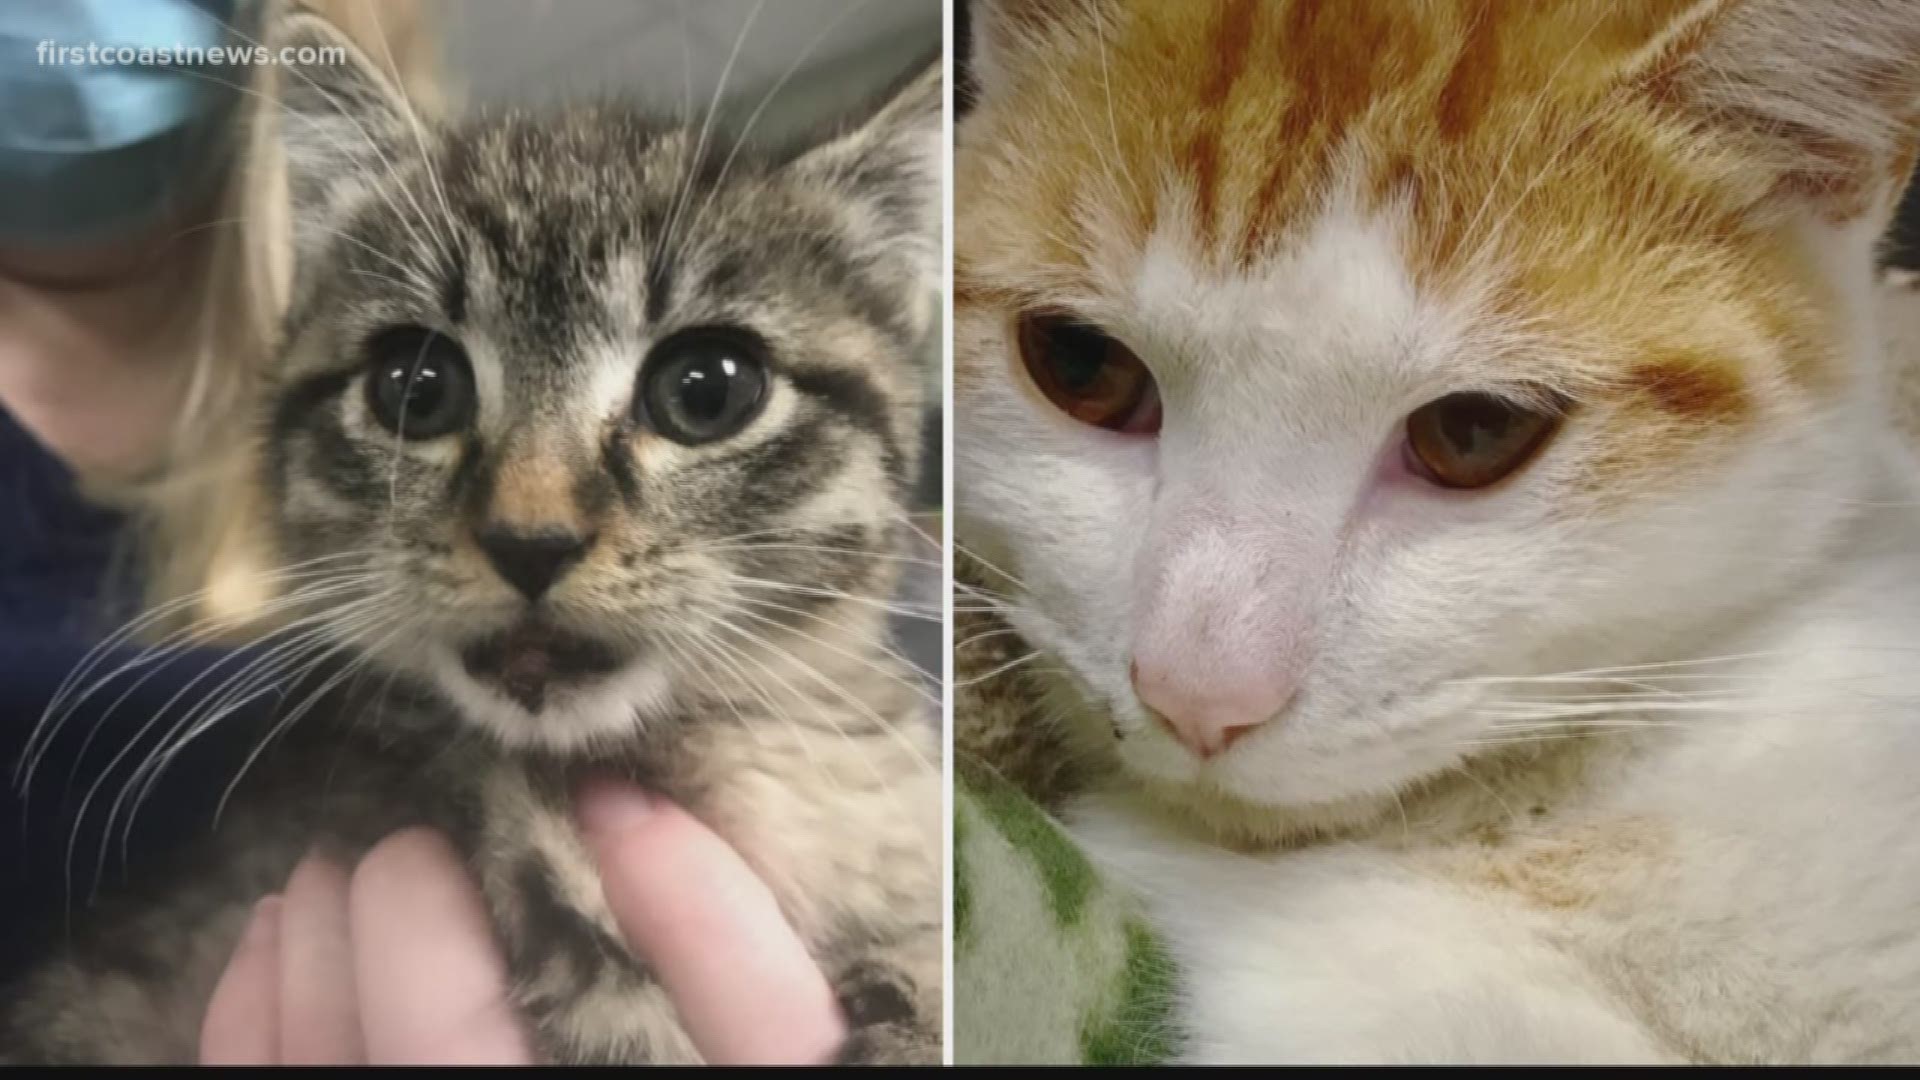 Adopted by Christmas? One was found on the side of the Buckman Bridge and the other along I-95. Clay Humane is asking the community for donations to pay for their treatment so they can be adopted by Christmas.